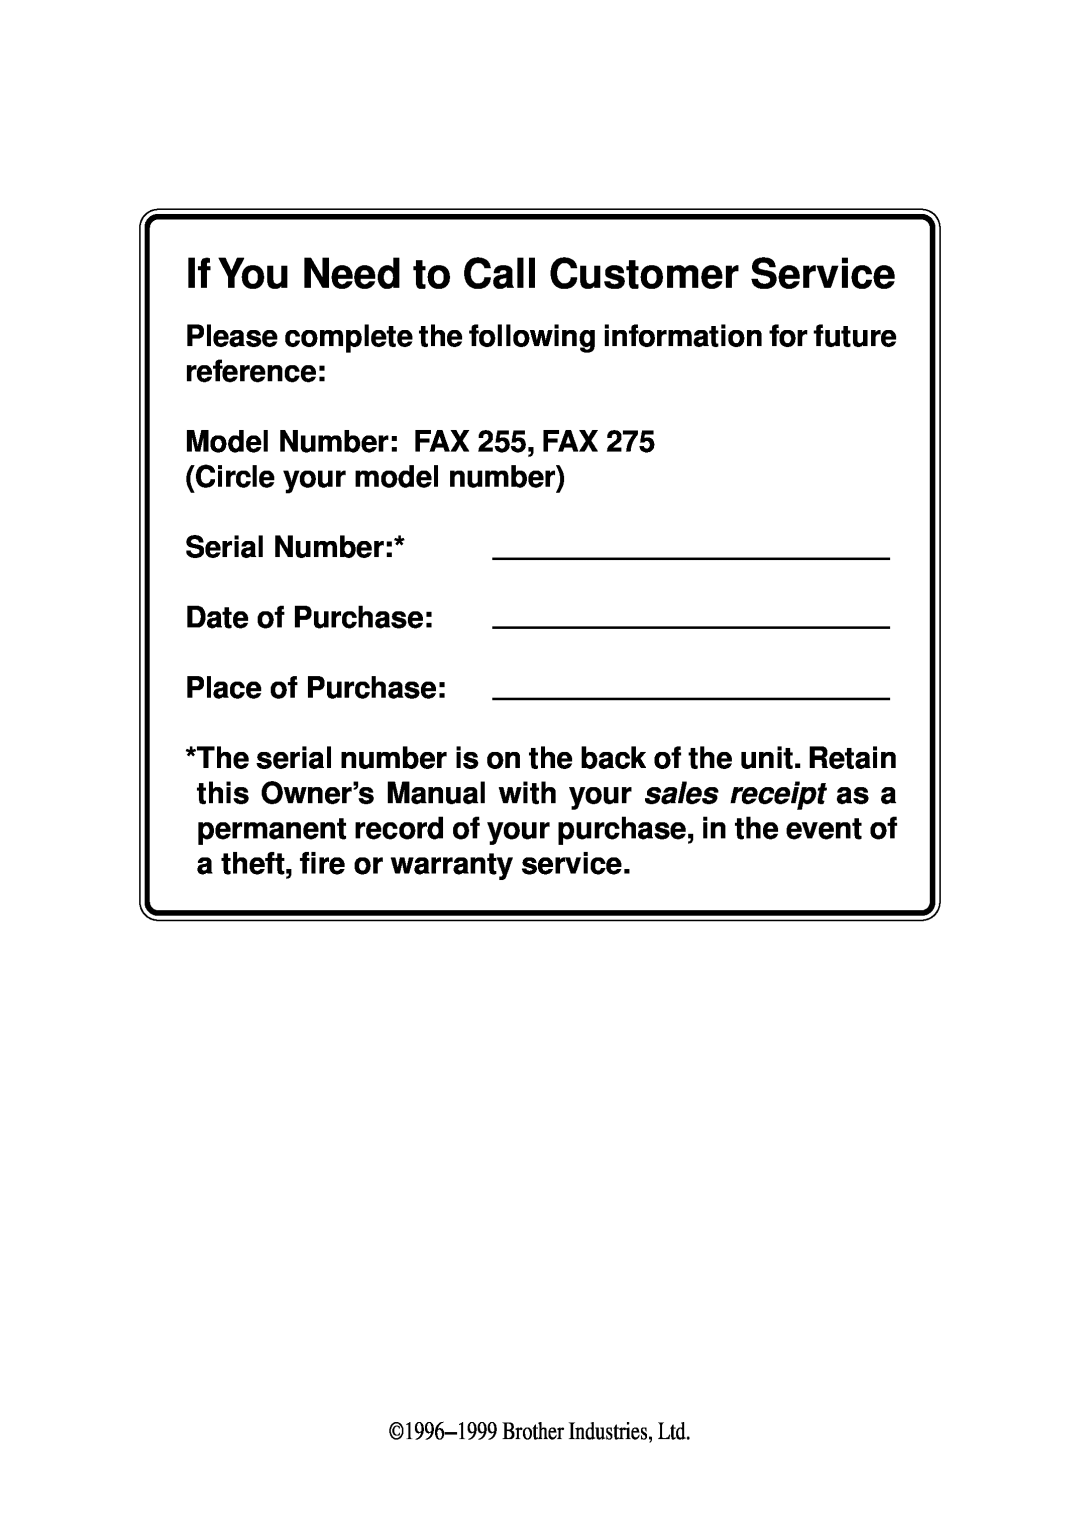 Brother FAX 255 Please complete the following information for future reference, Date of Purchase Place of Purchase 